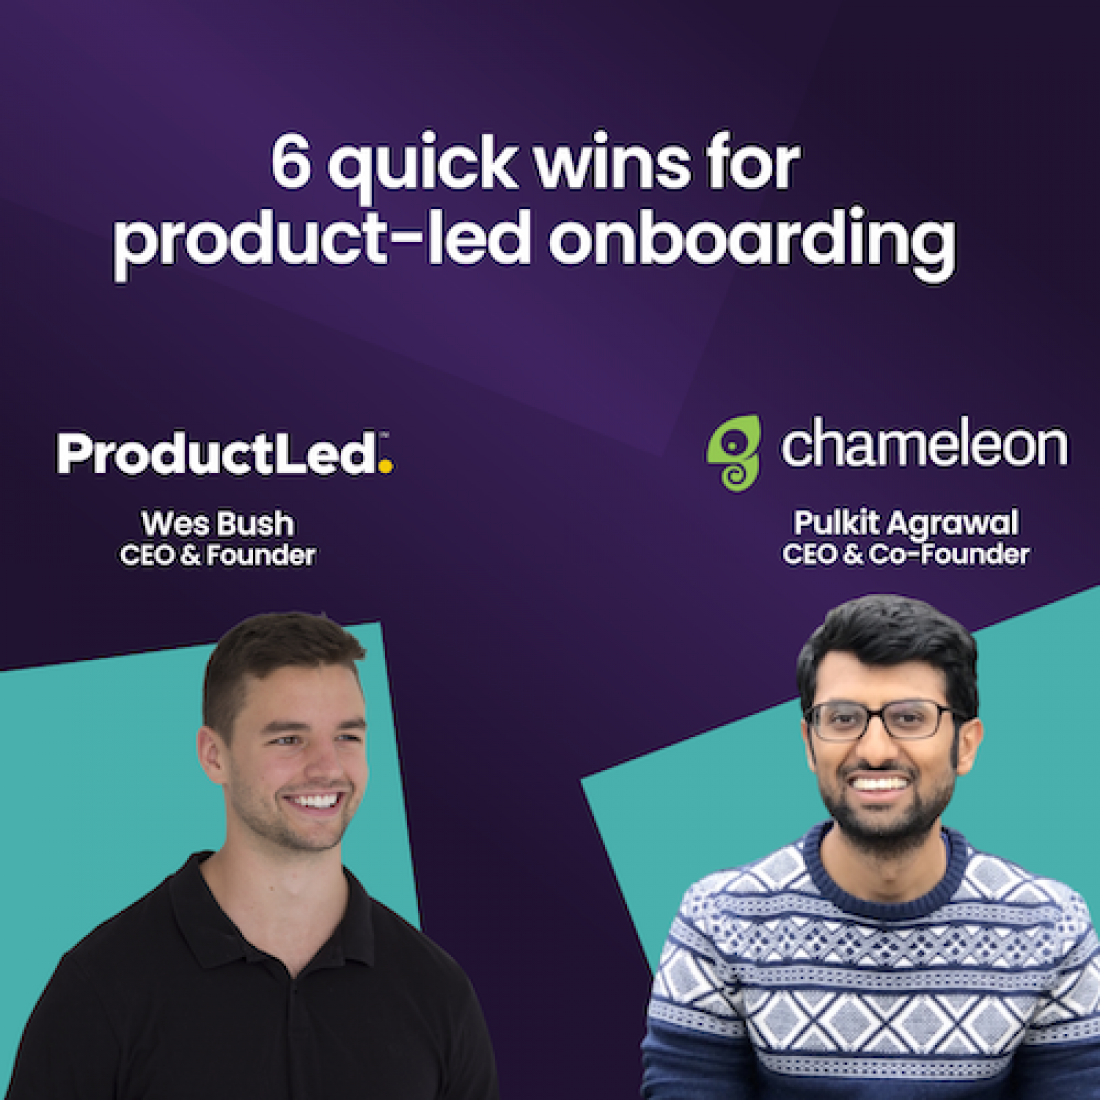 6 quick wins for product-led onboarding